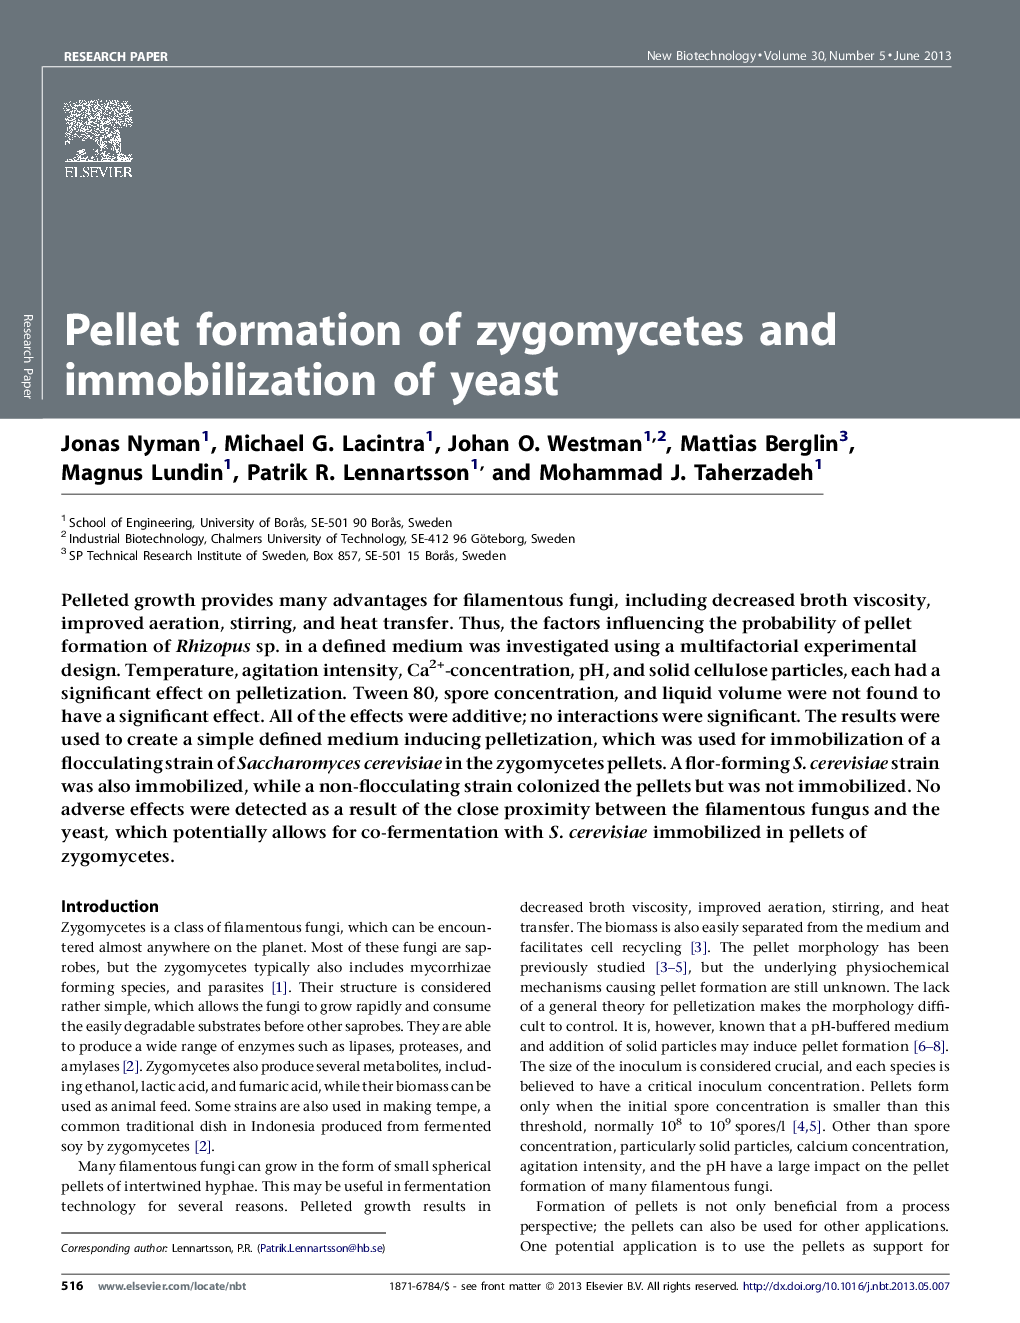 Pellet formation of zygomycetes and immobilization of yeast